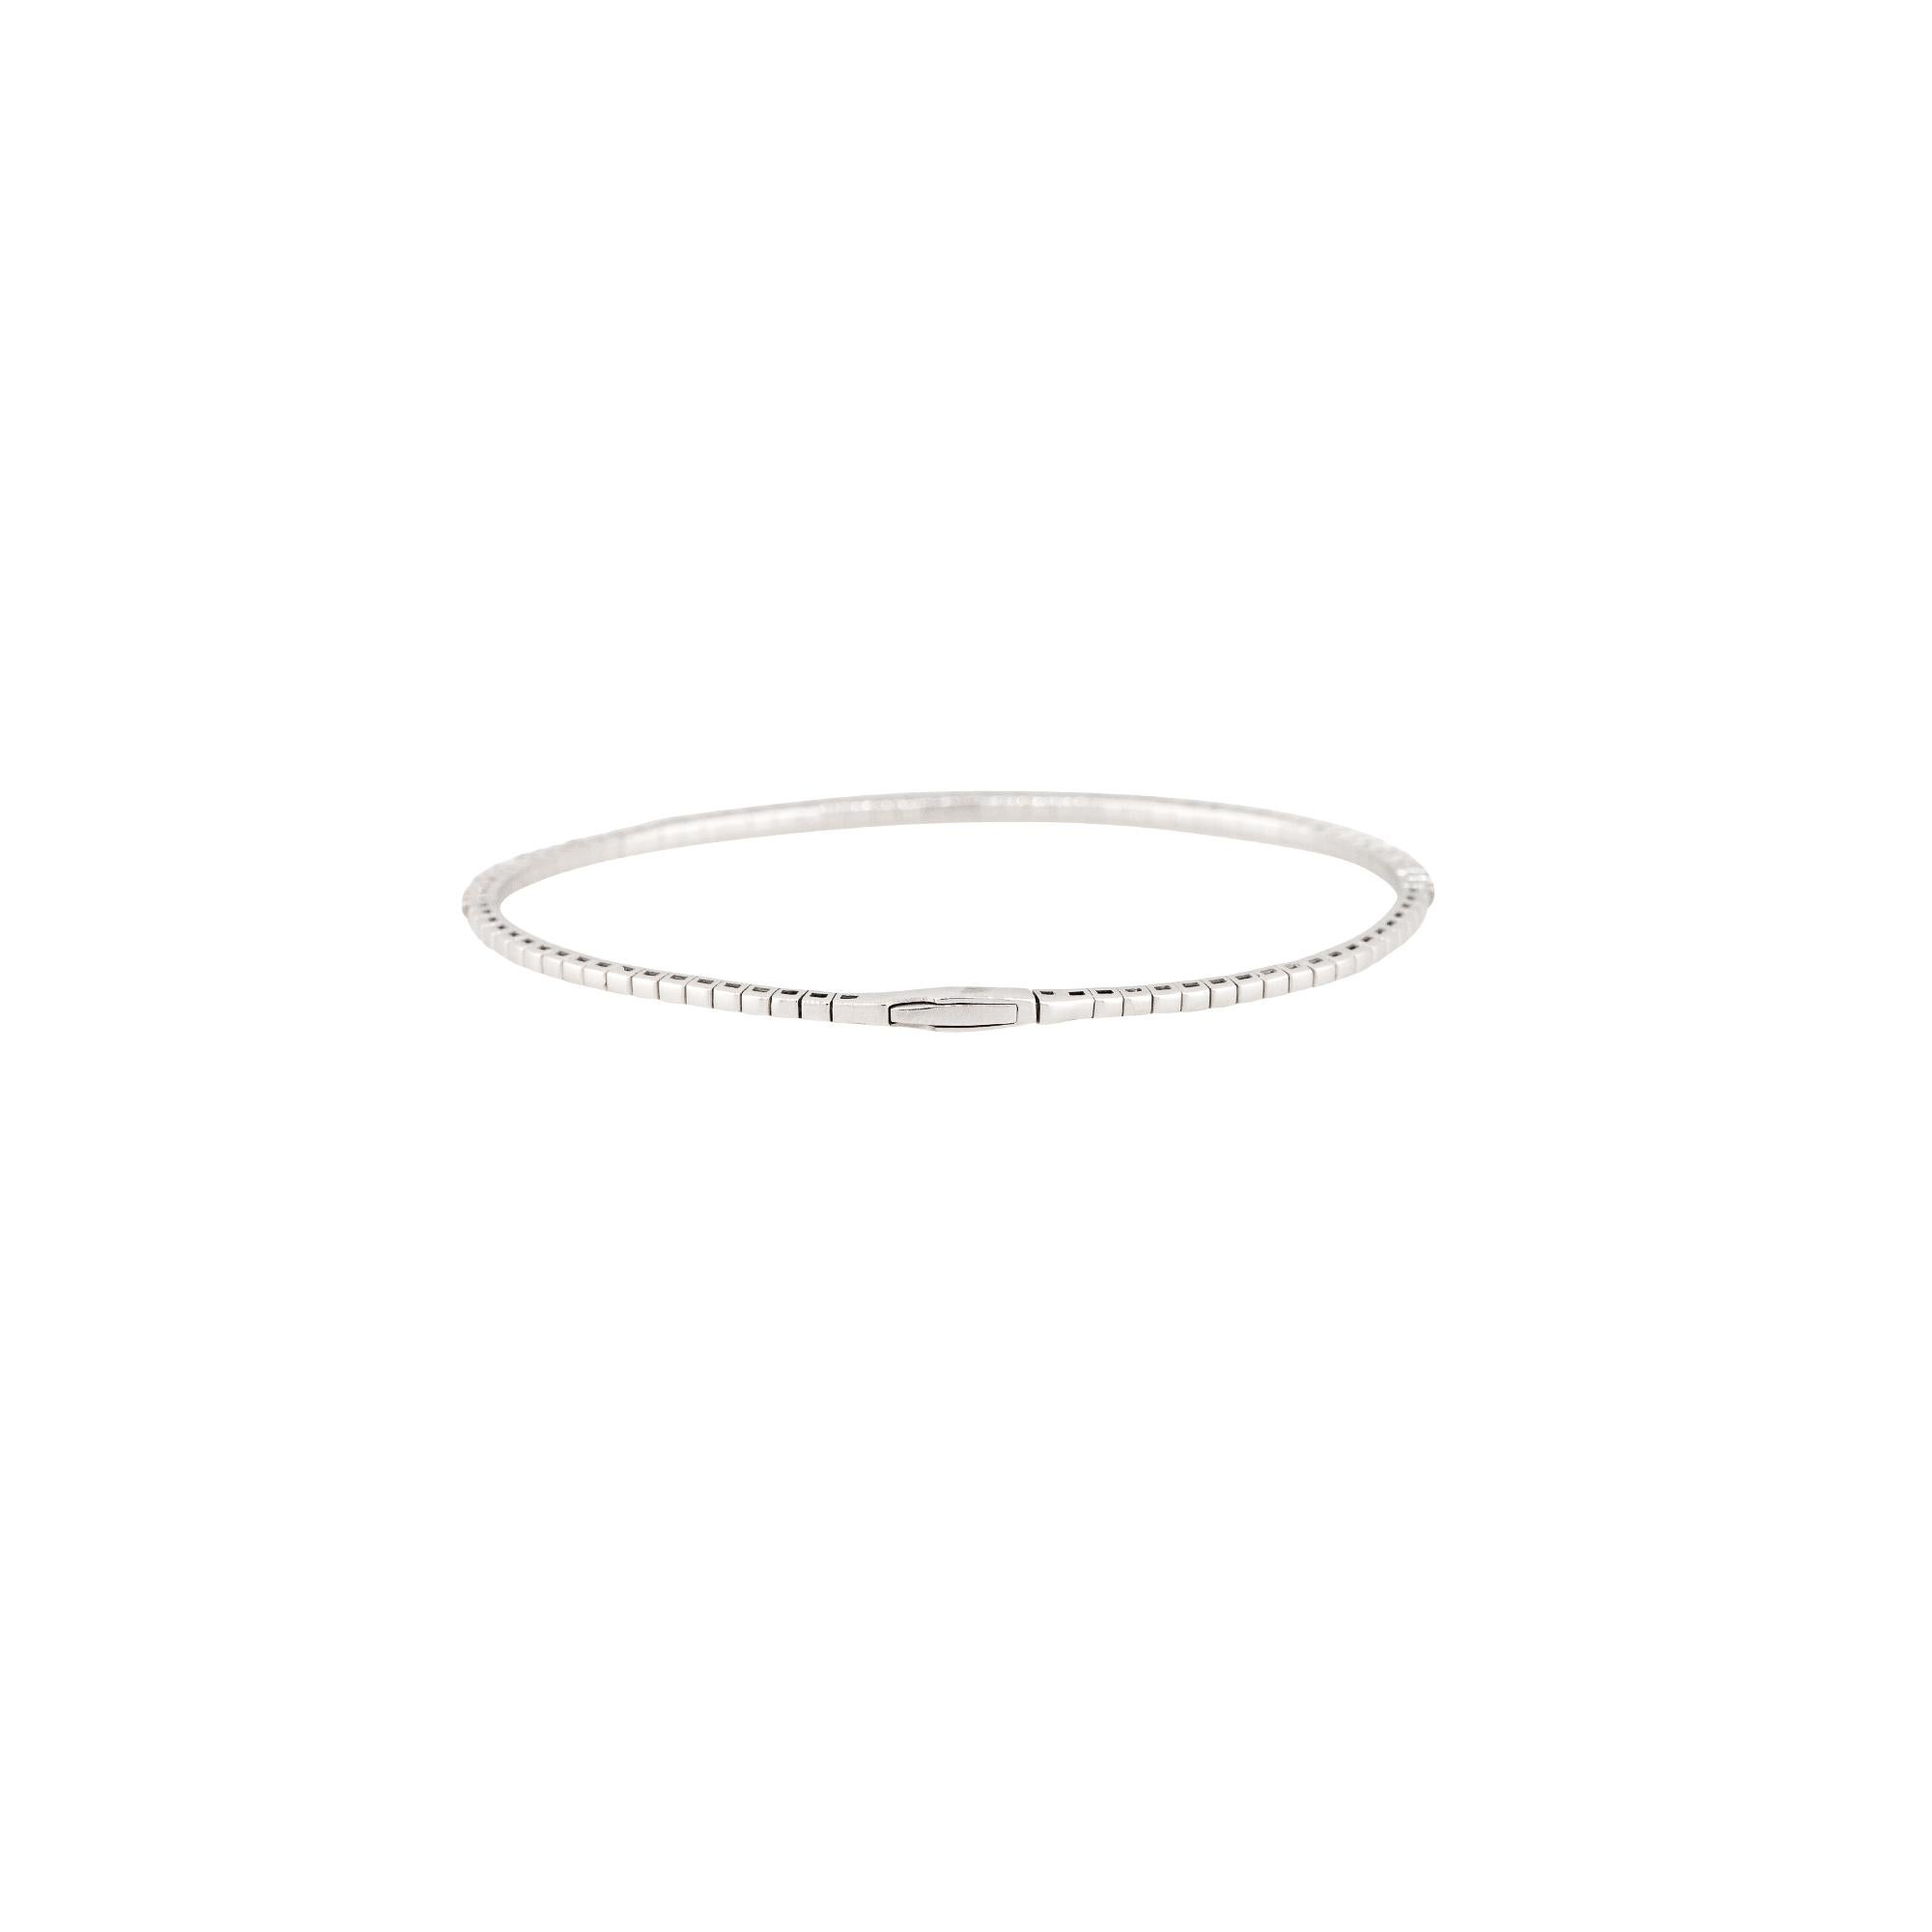 14k White Gold 0.95ctw Flexible Diamond Stackable Bangle Bracelet

Material: 14k White Gold
Diamond Details: Approximately 0.95ctw of Round Brilliant Diamonds. There are 51 Diamonds total. Diamonds are approximately G/H in Color and SI in